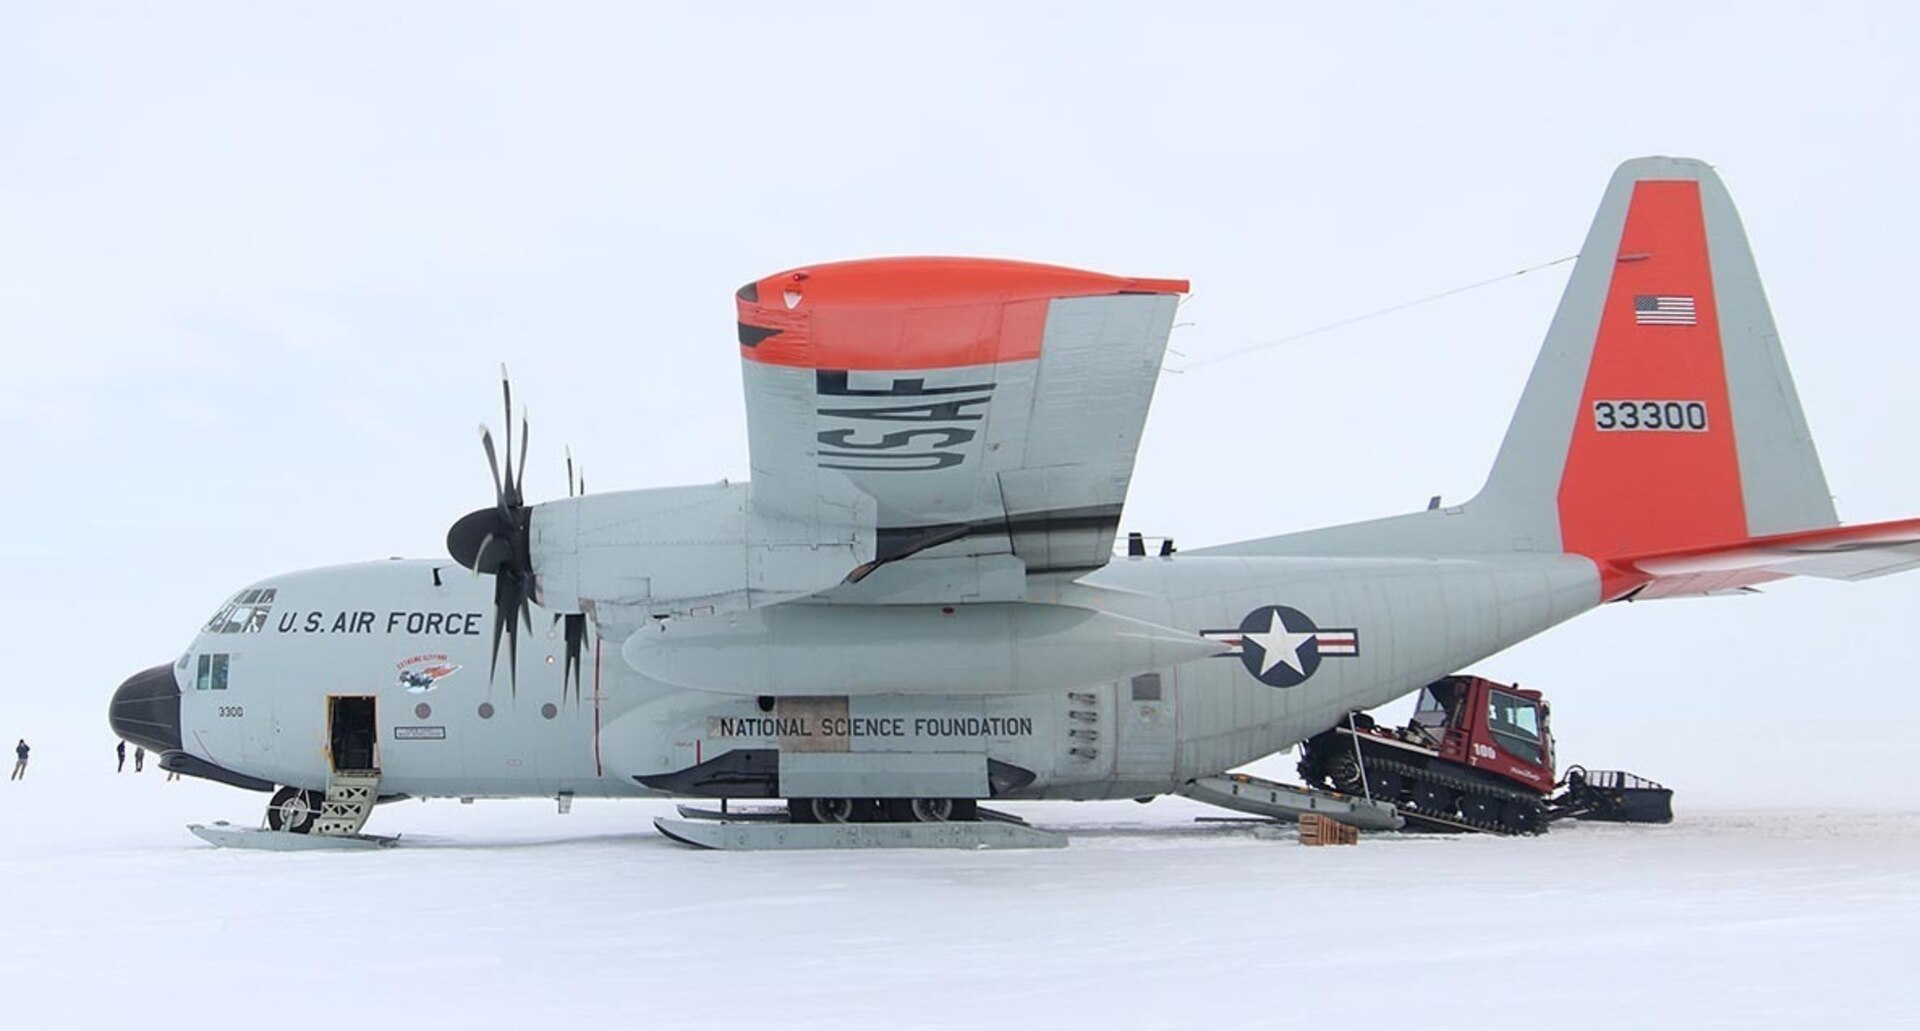 An LC-130 assigned to the New York Air National Guard's 109th Airlift Wing, based at Stratton Air National Guard Base in Scotia, N.Y., offloads cargo in Greenland  April 26, 2019. Similar aircraft will be flying missions in Greenland at the end of April 2022 to resupply National Science Foundation facilities on the Greenland Ice Cap.